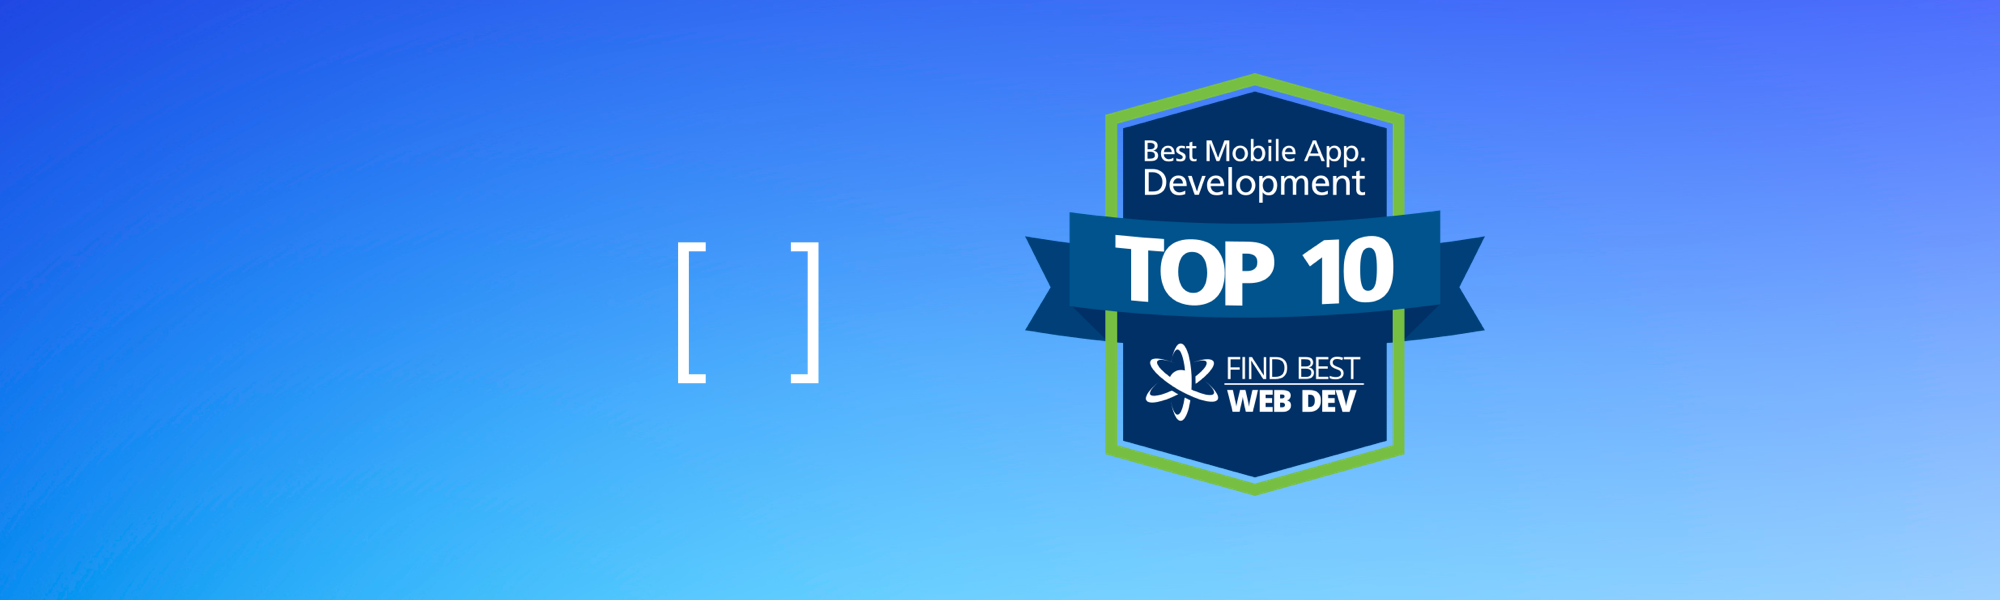 THE BLUE BOX has been selected by the Find Best Web Development's editorial staff to be one of the Top 10 Mobile App Providers.